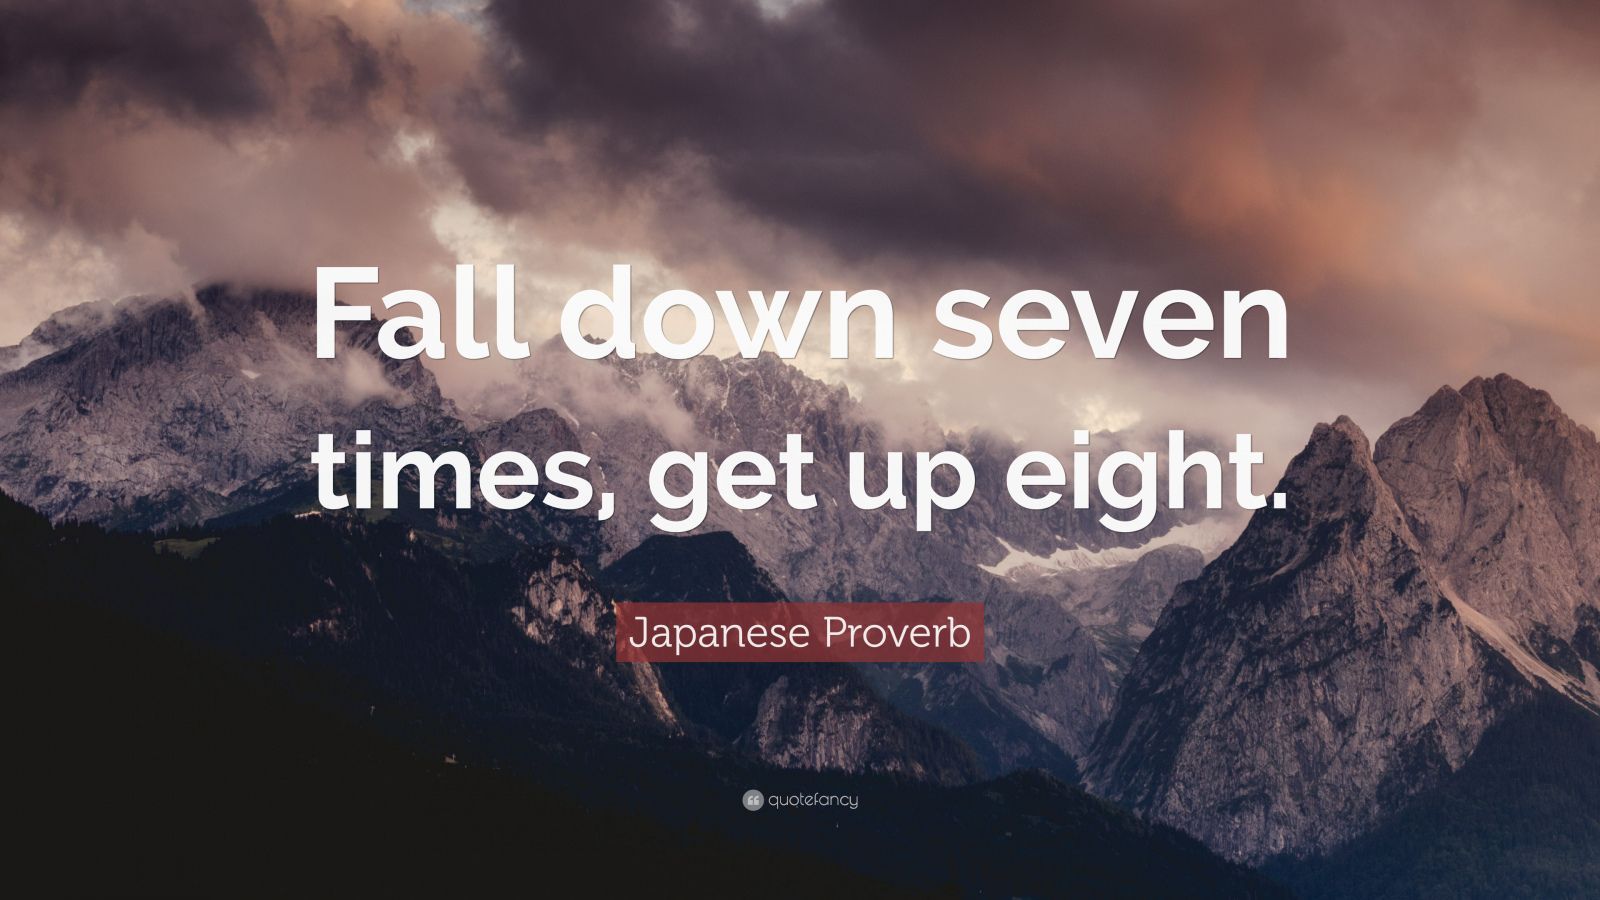 Japanese Proverb Quote: “Fall down seven times, get up eight.” (34 wallpaper)